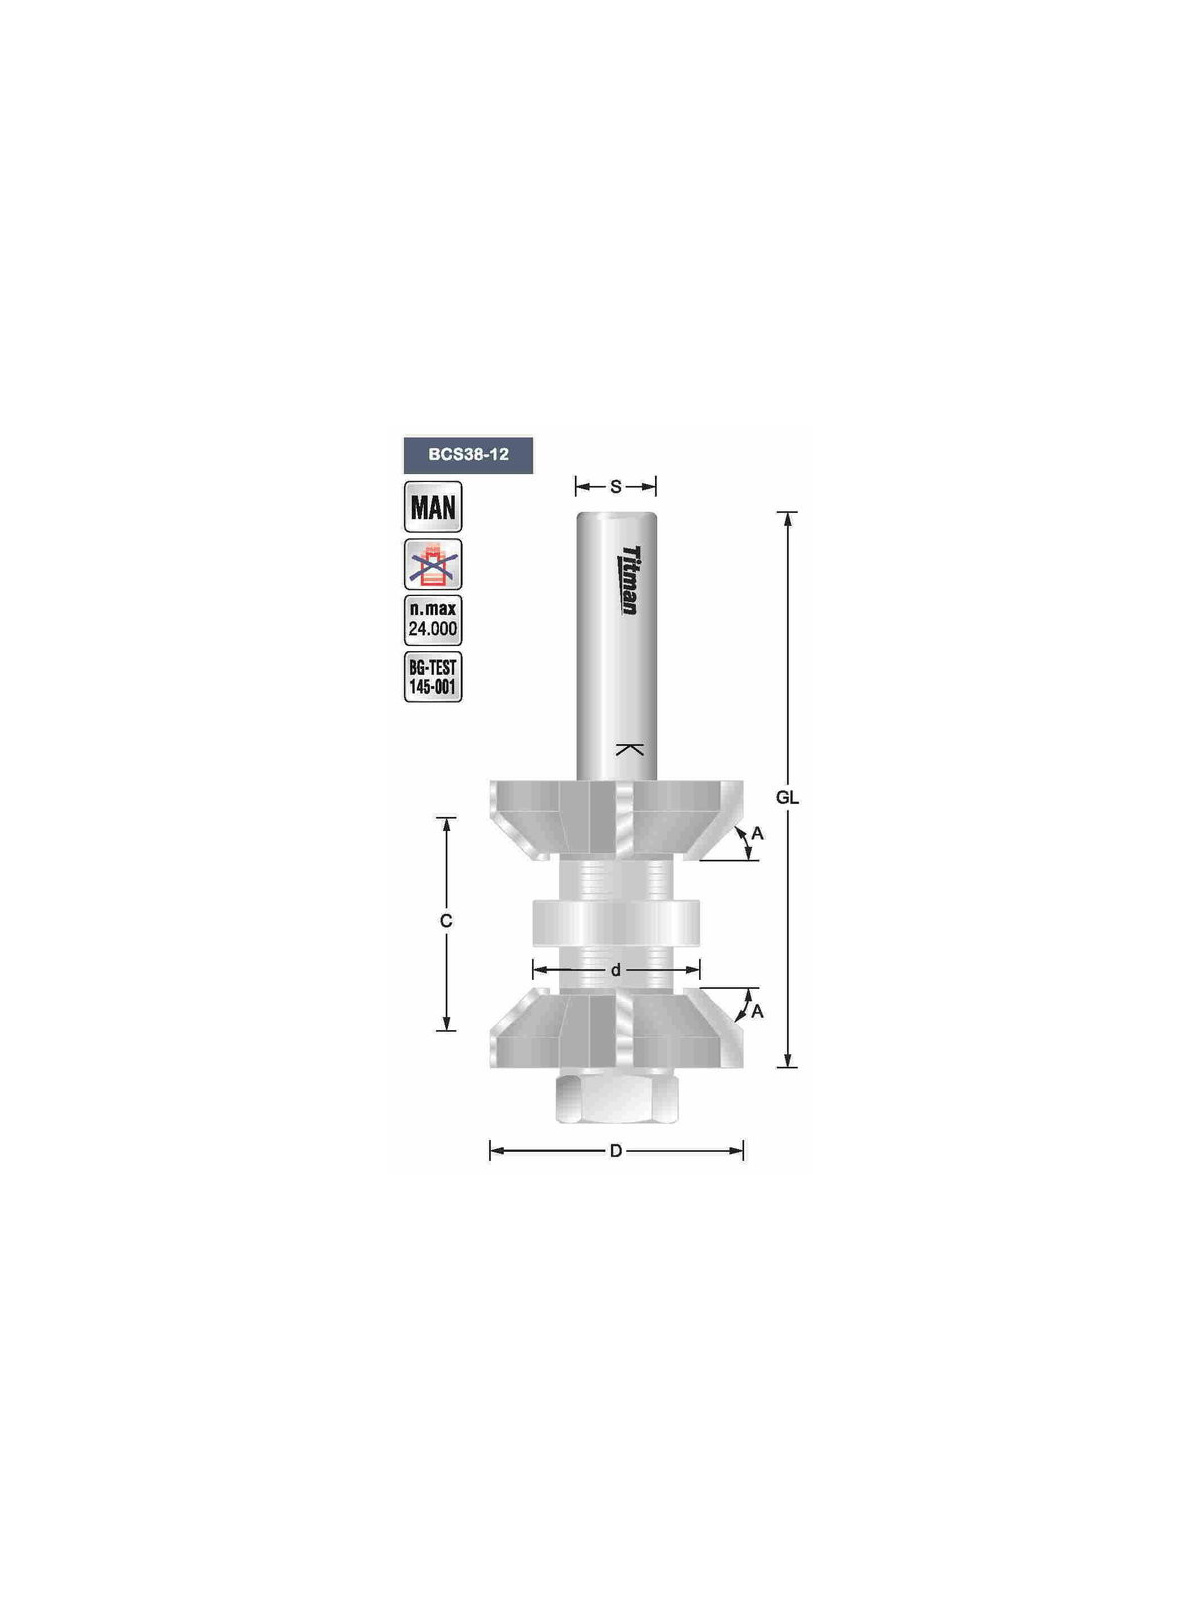 Titman Double chamfering bit with bearing 16 to 32 mm. S12mm | JVL-Europe